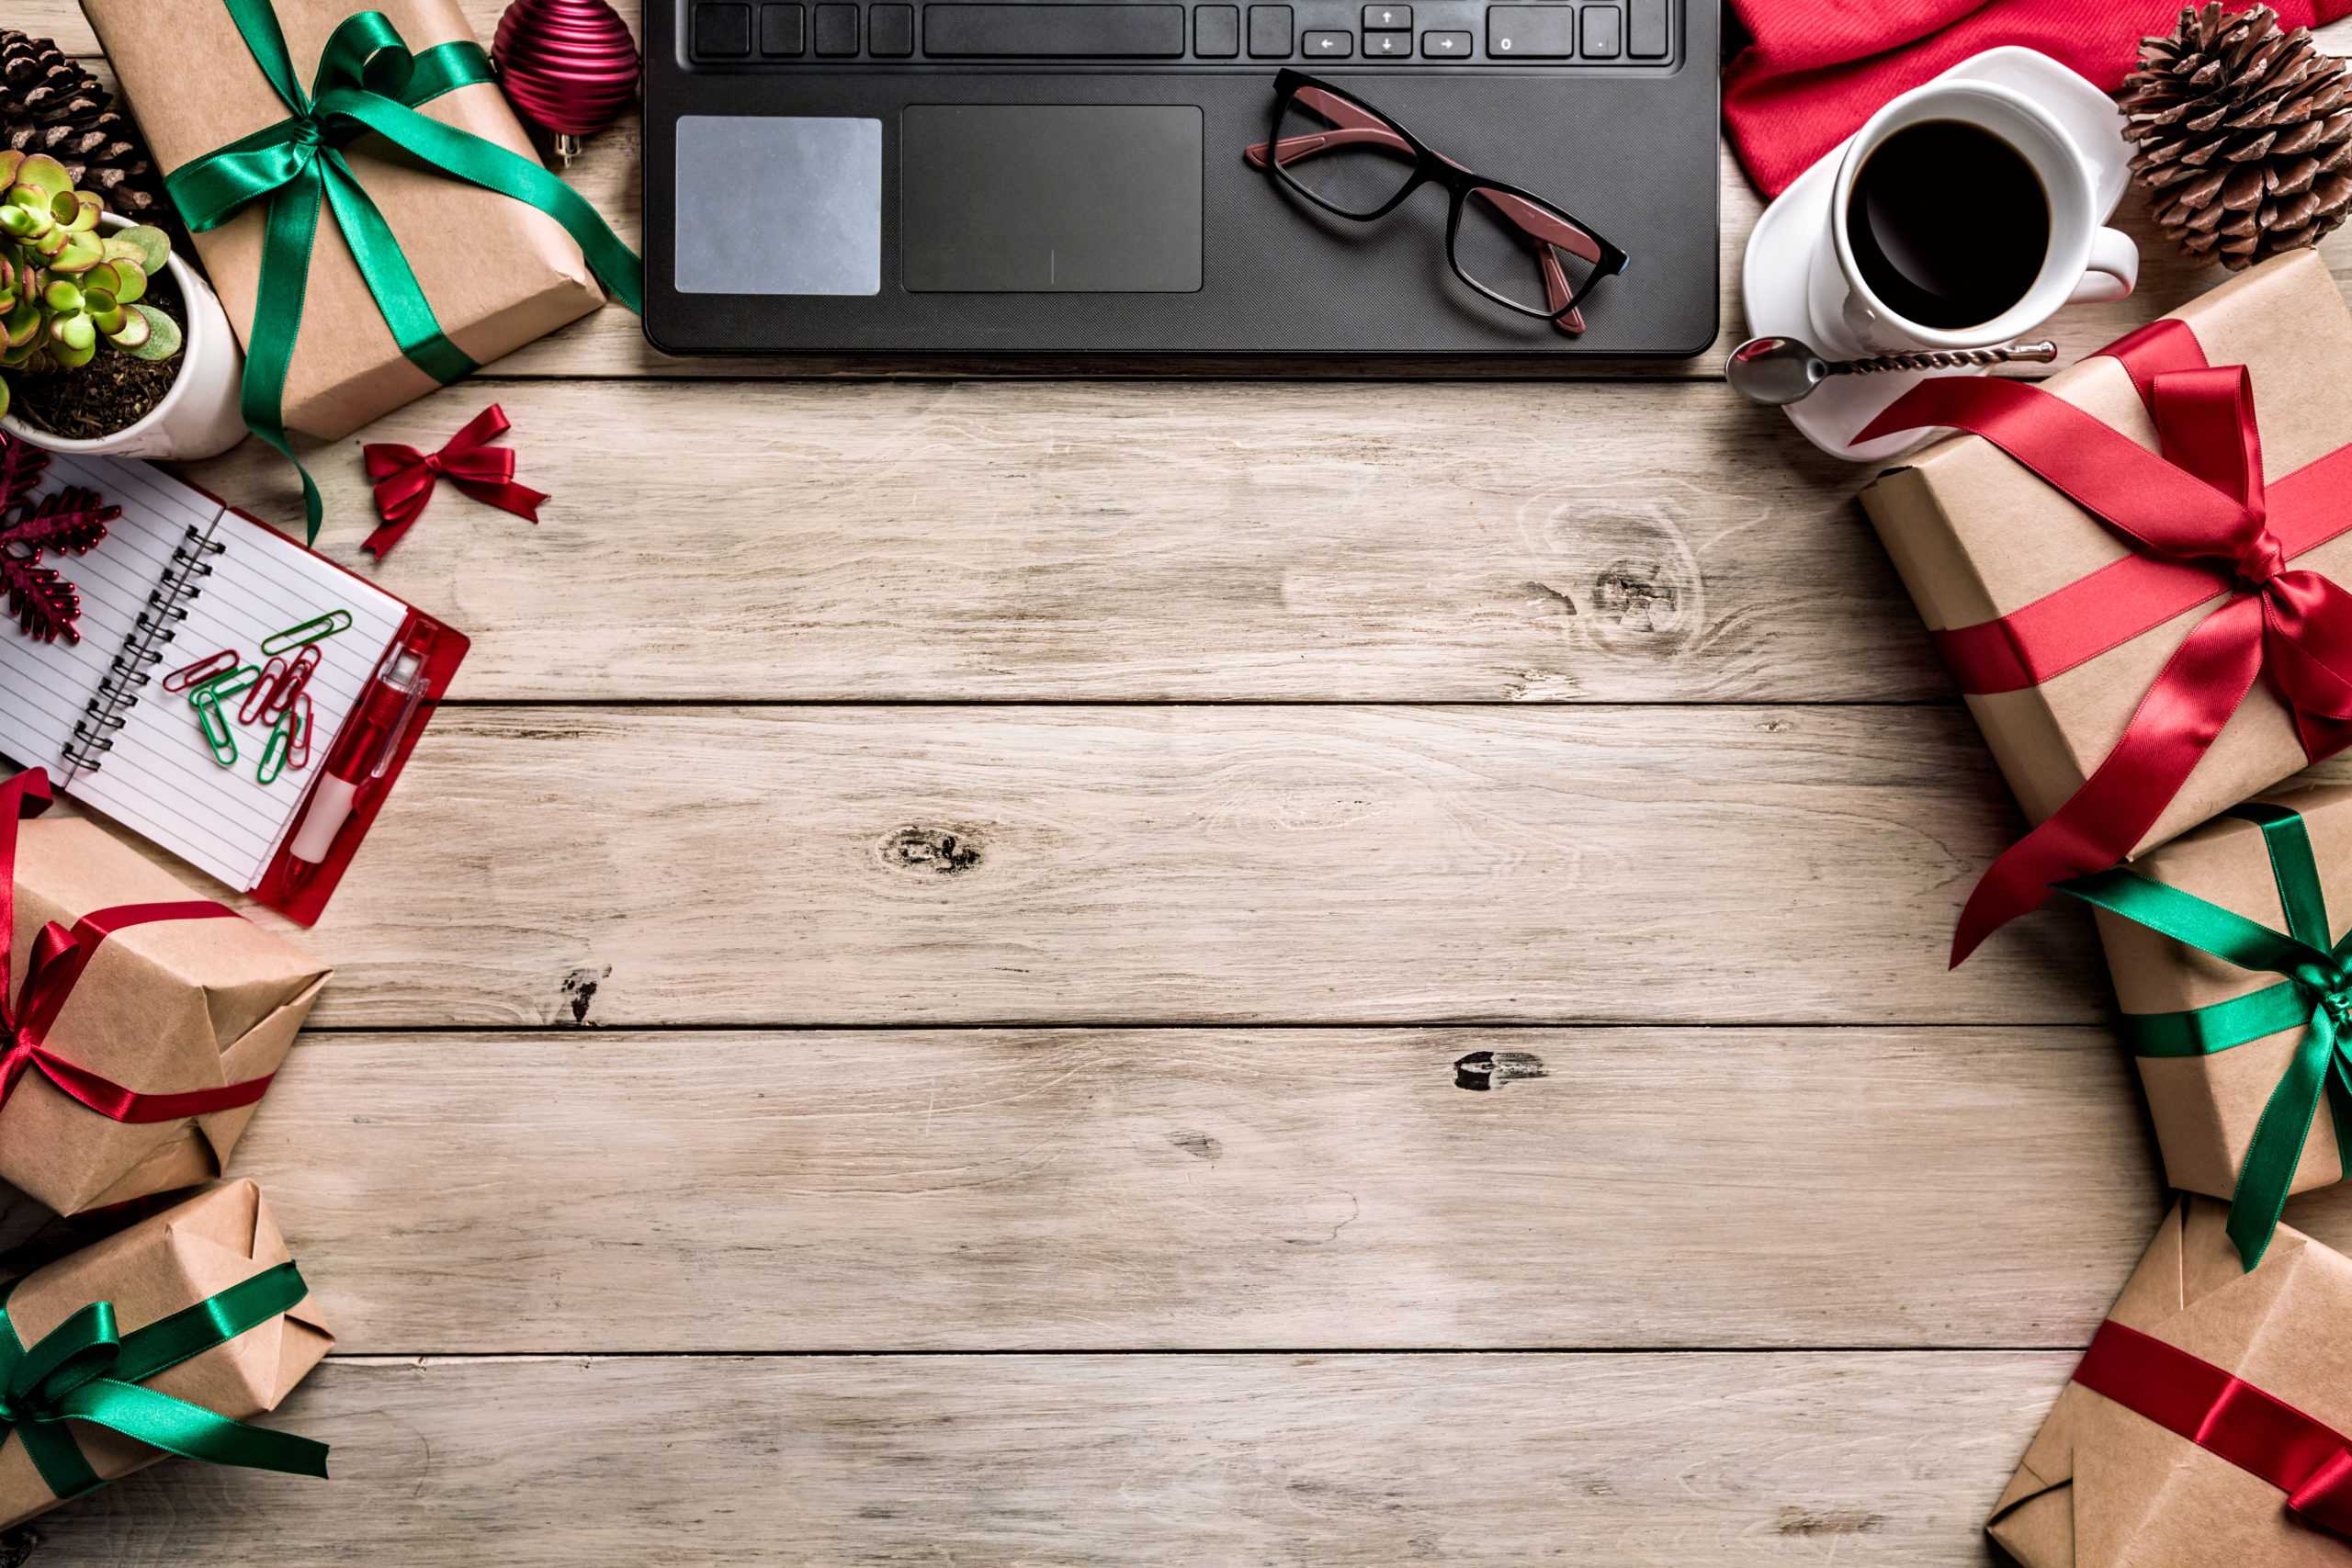 7 Tips to Show Employee Appreciation During the Holiday Season